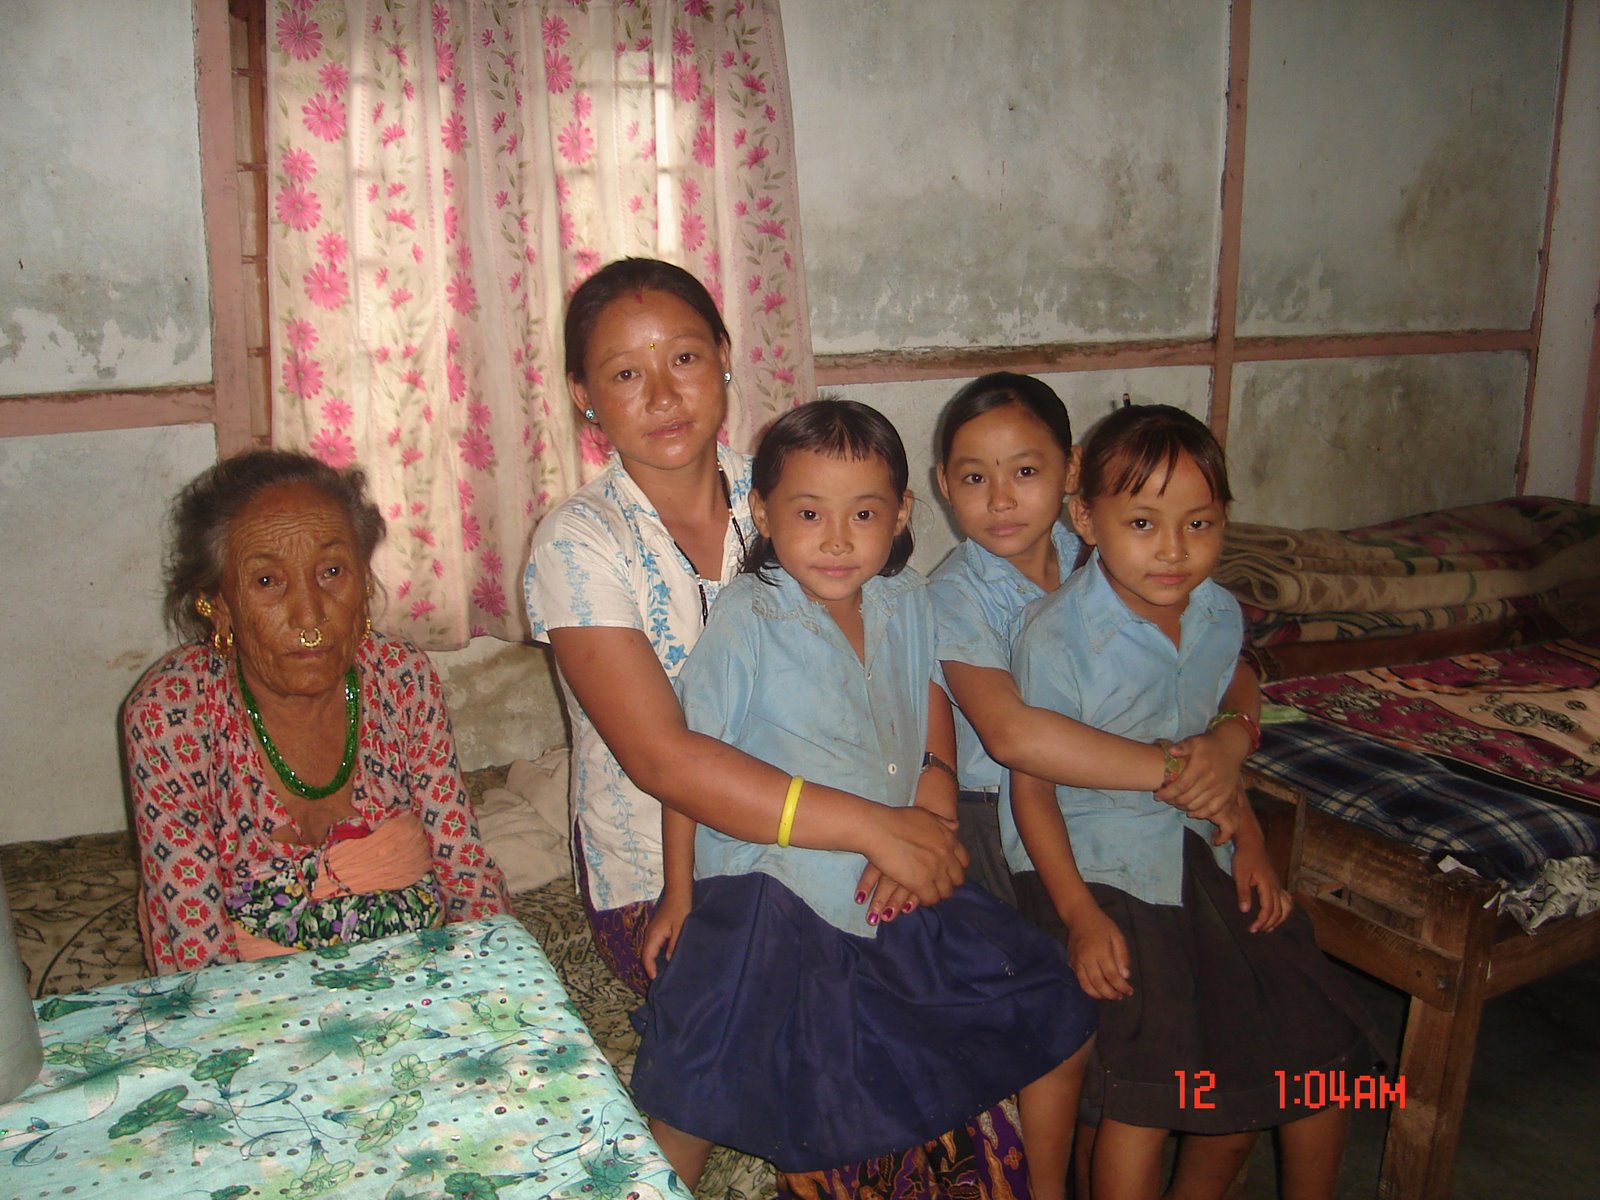 [Nar+Kumari+Limbu+with+her+dauthers+and+mother+in+law.JPG]